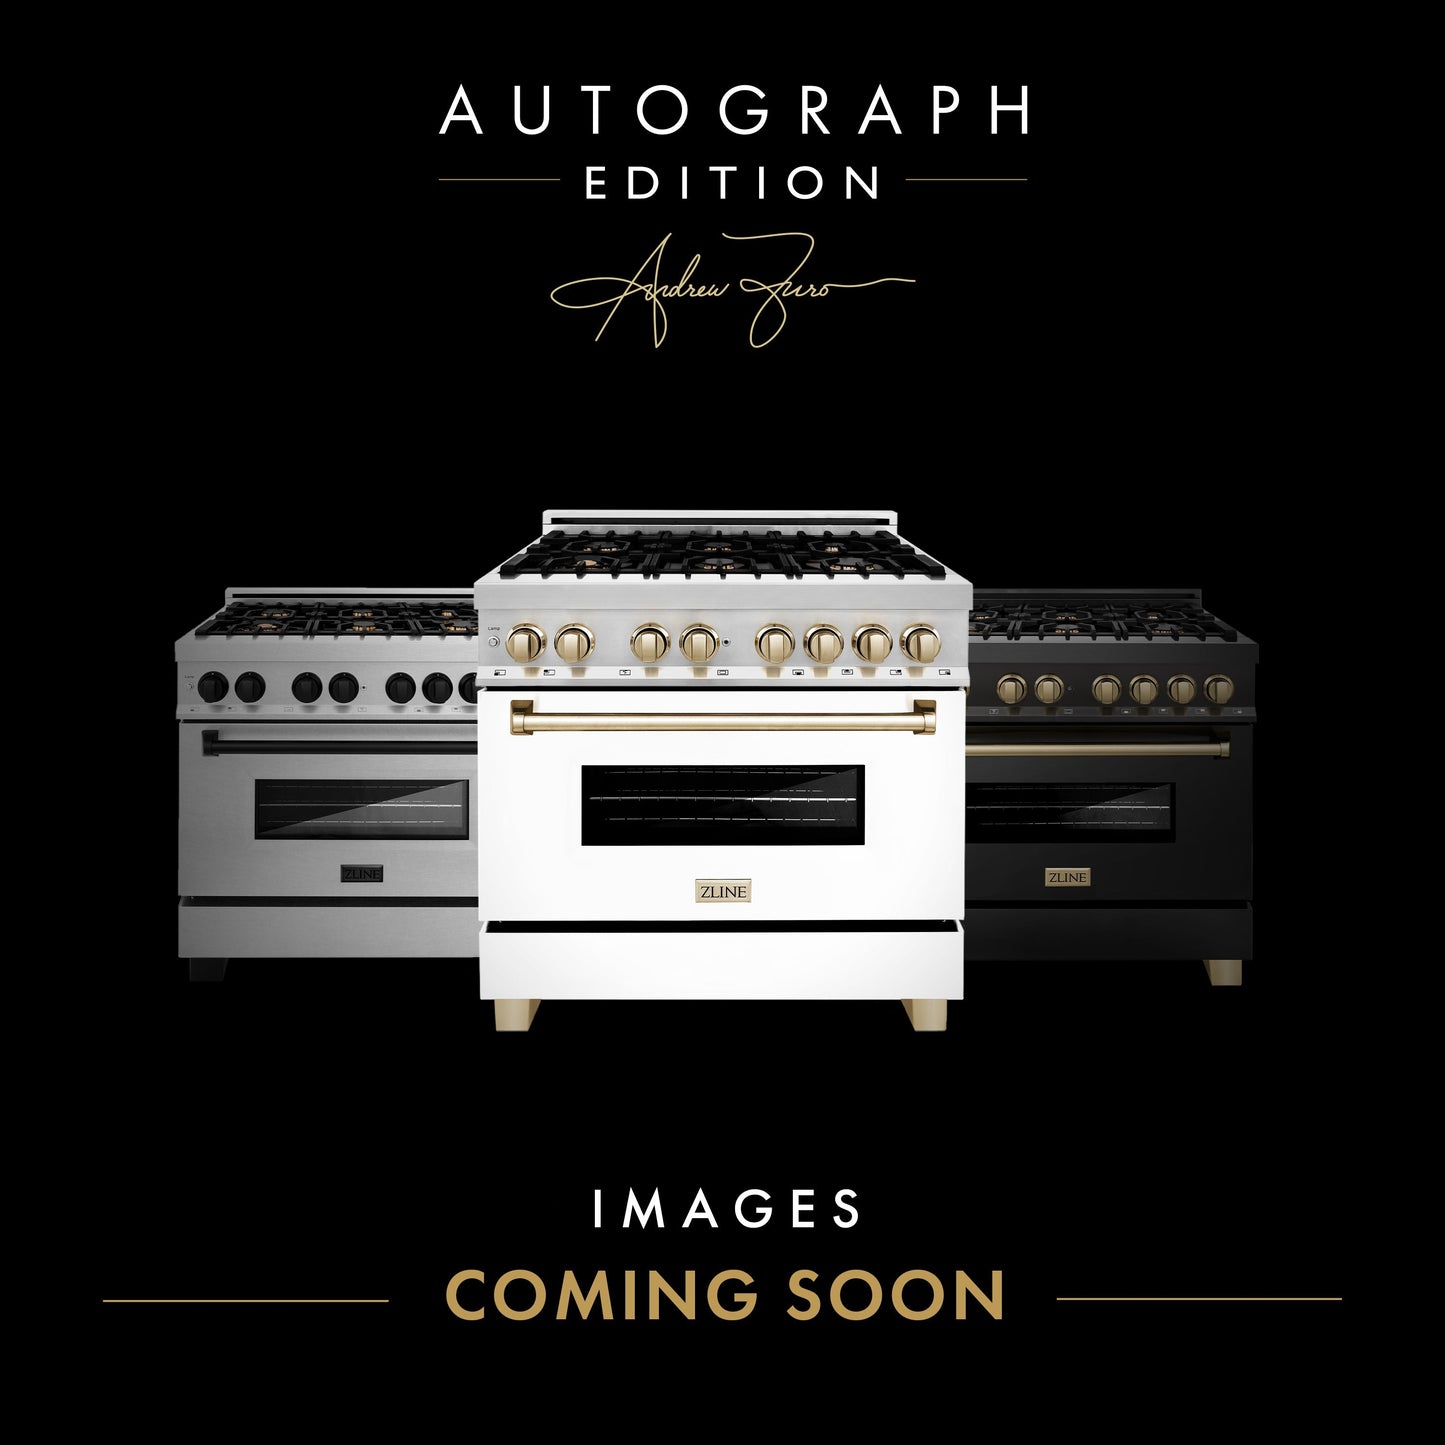 ZLINE Autograph Edition 24" Dual Fuel Range with Gas Stove and Electric Oven in Stainless Steel with Accents (RAZ-24)